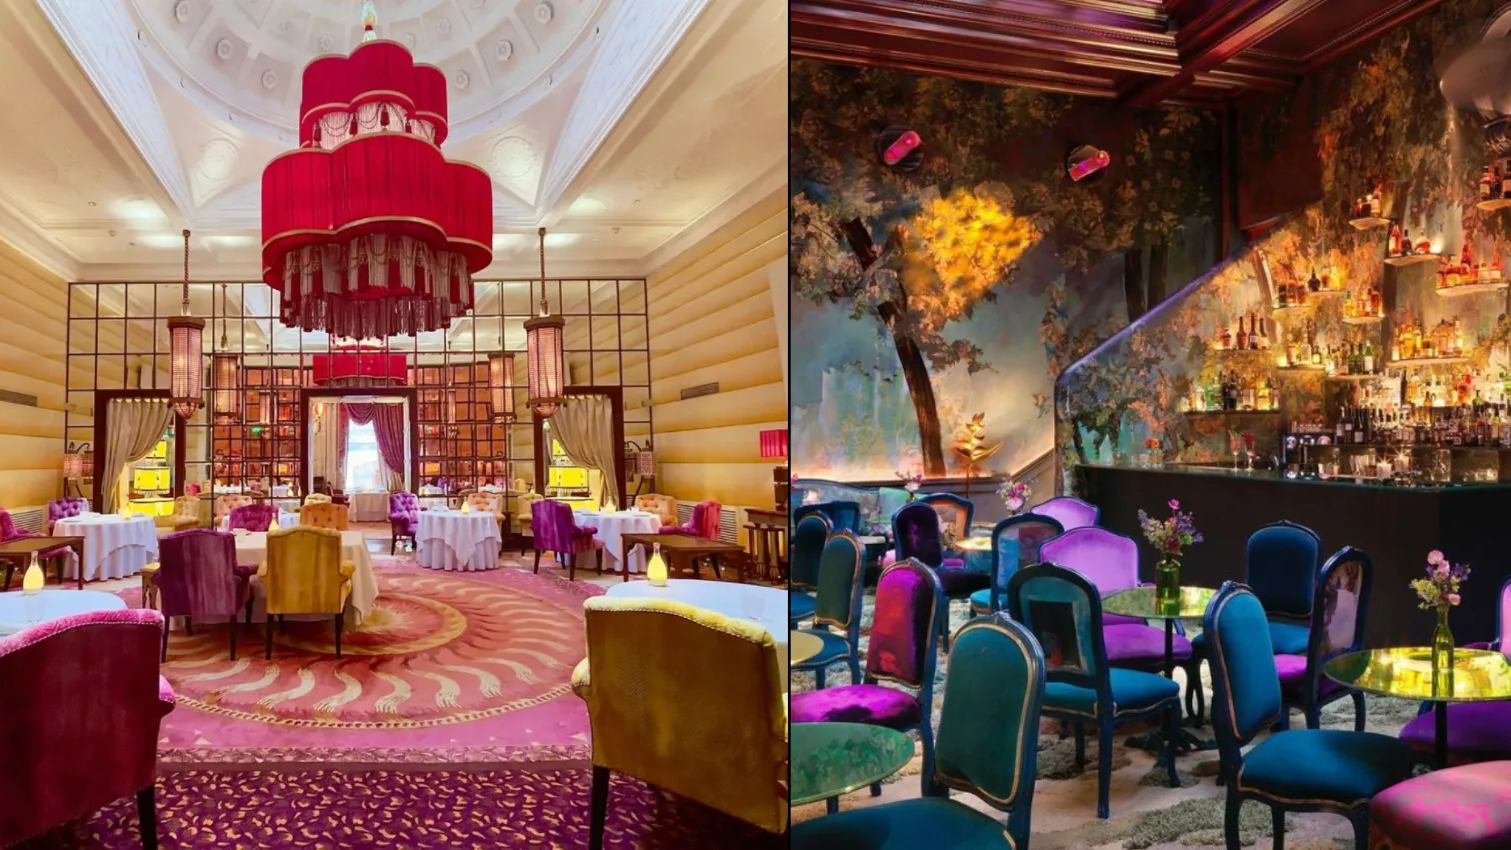 Walk Into 4 Different Worlds In This MichelinStarred Restaurant In London  Each With Its Own Magic